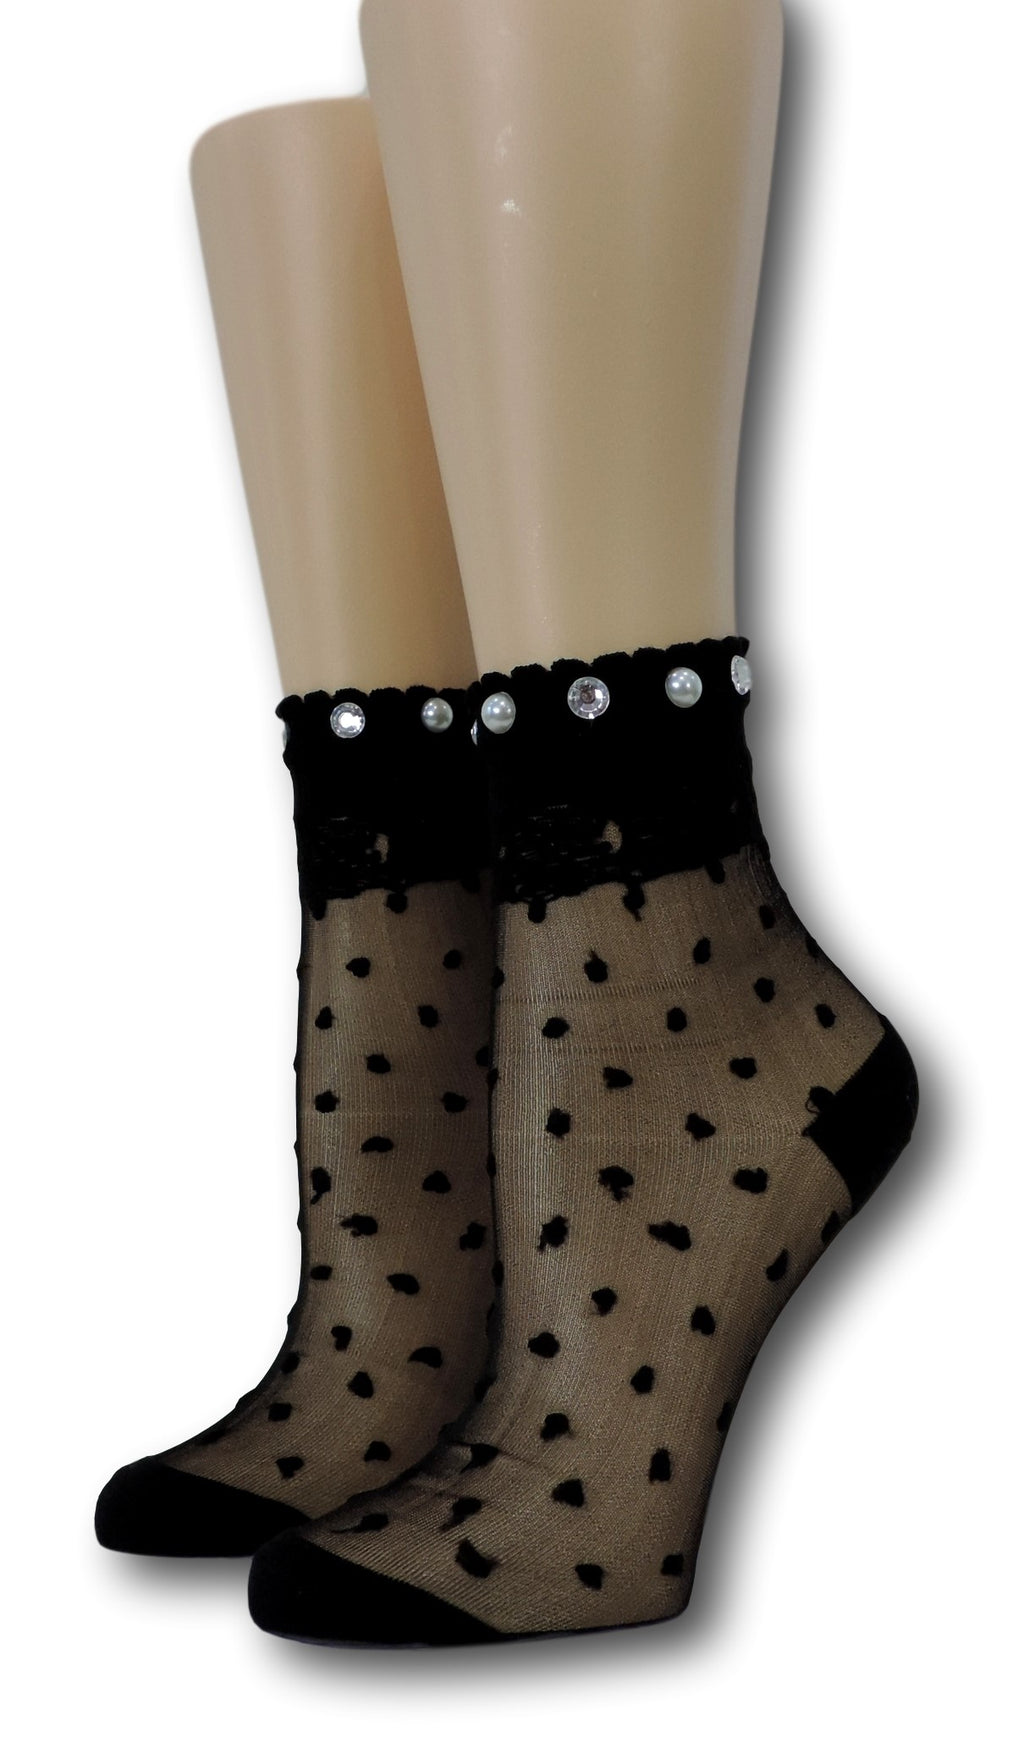 Ivory Royal Dotted Sheer Socks with beads